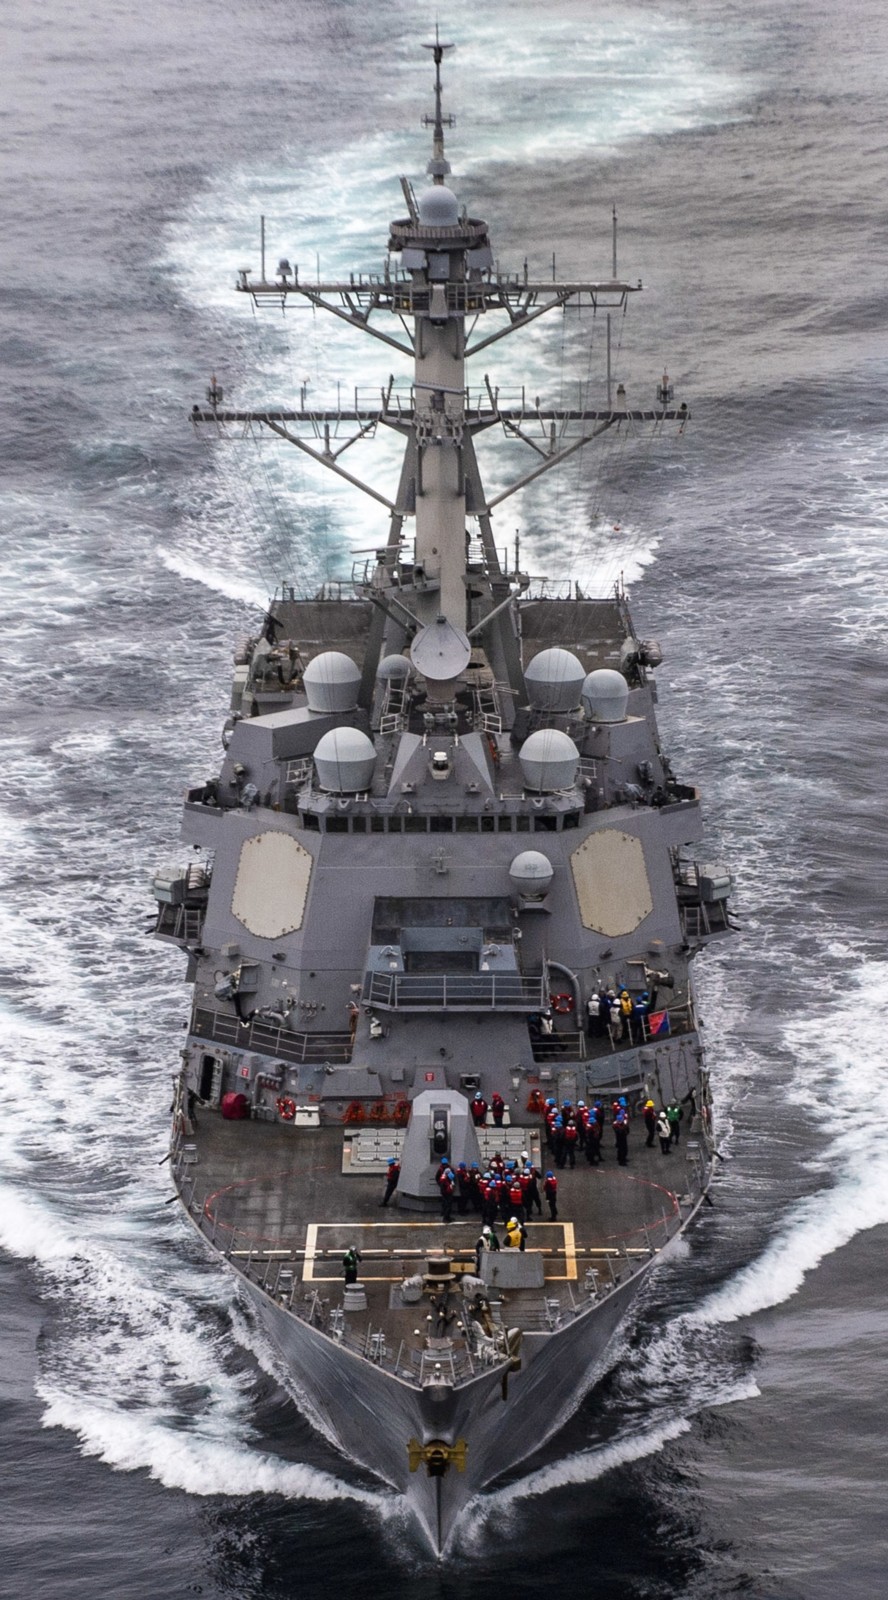 ddg-112 uss michael murphy arleigh burke class guided missile destroyer aegis us navy 63 exercise teamwork south